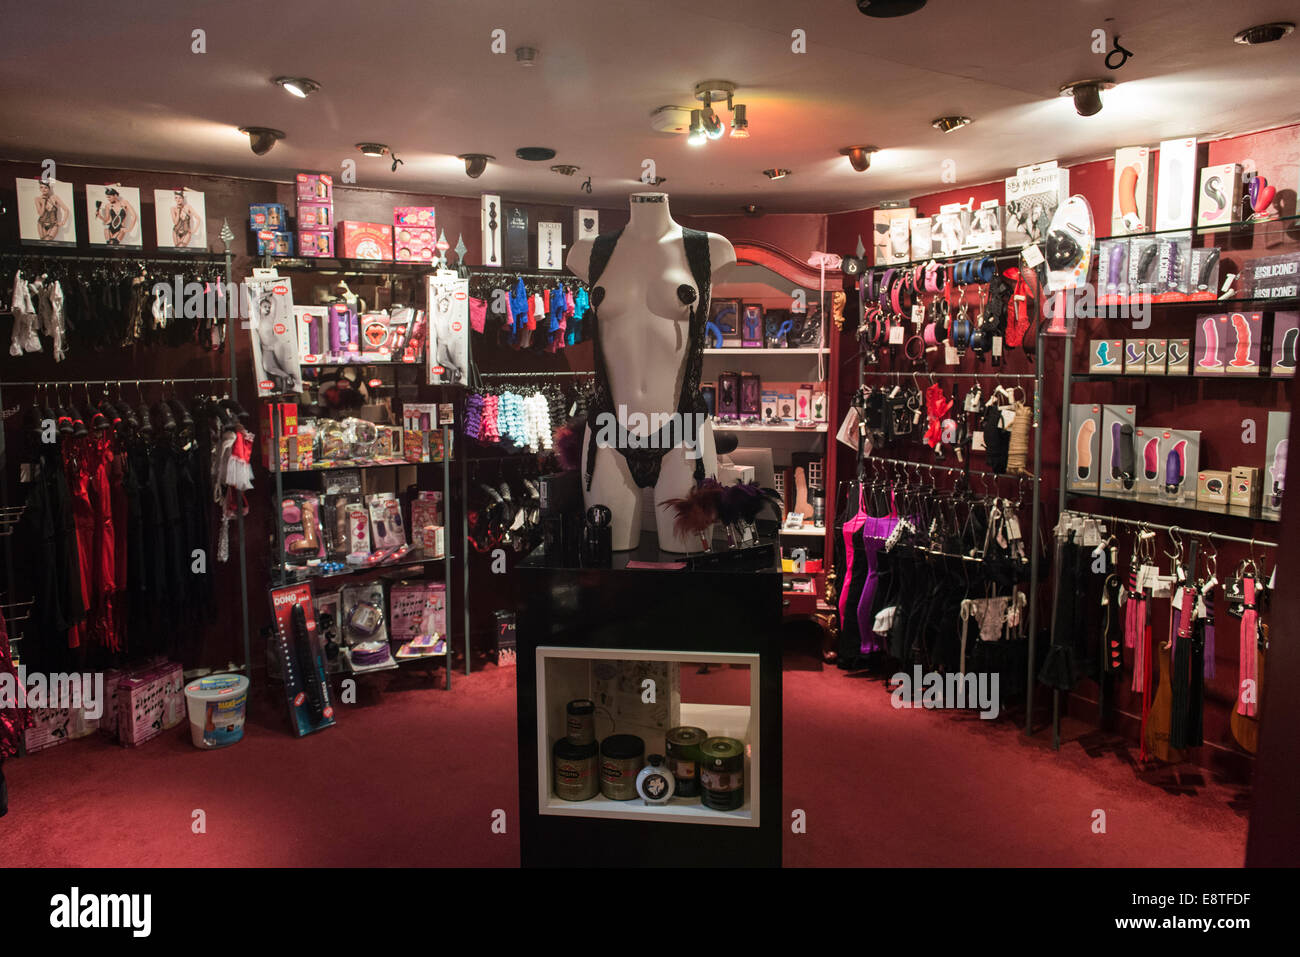 inside of a classy womens friendly sex shop, selling sex toys, lingerie,  outfits, clothes, lubes, on the shelves & shop displays Stock Photo - Alamy